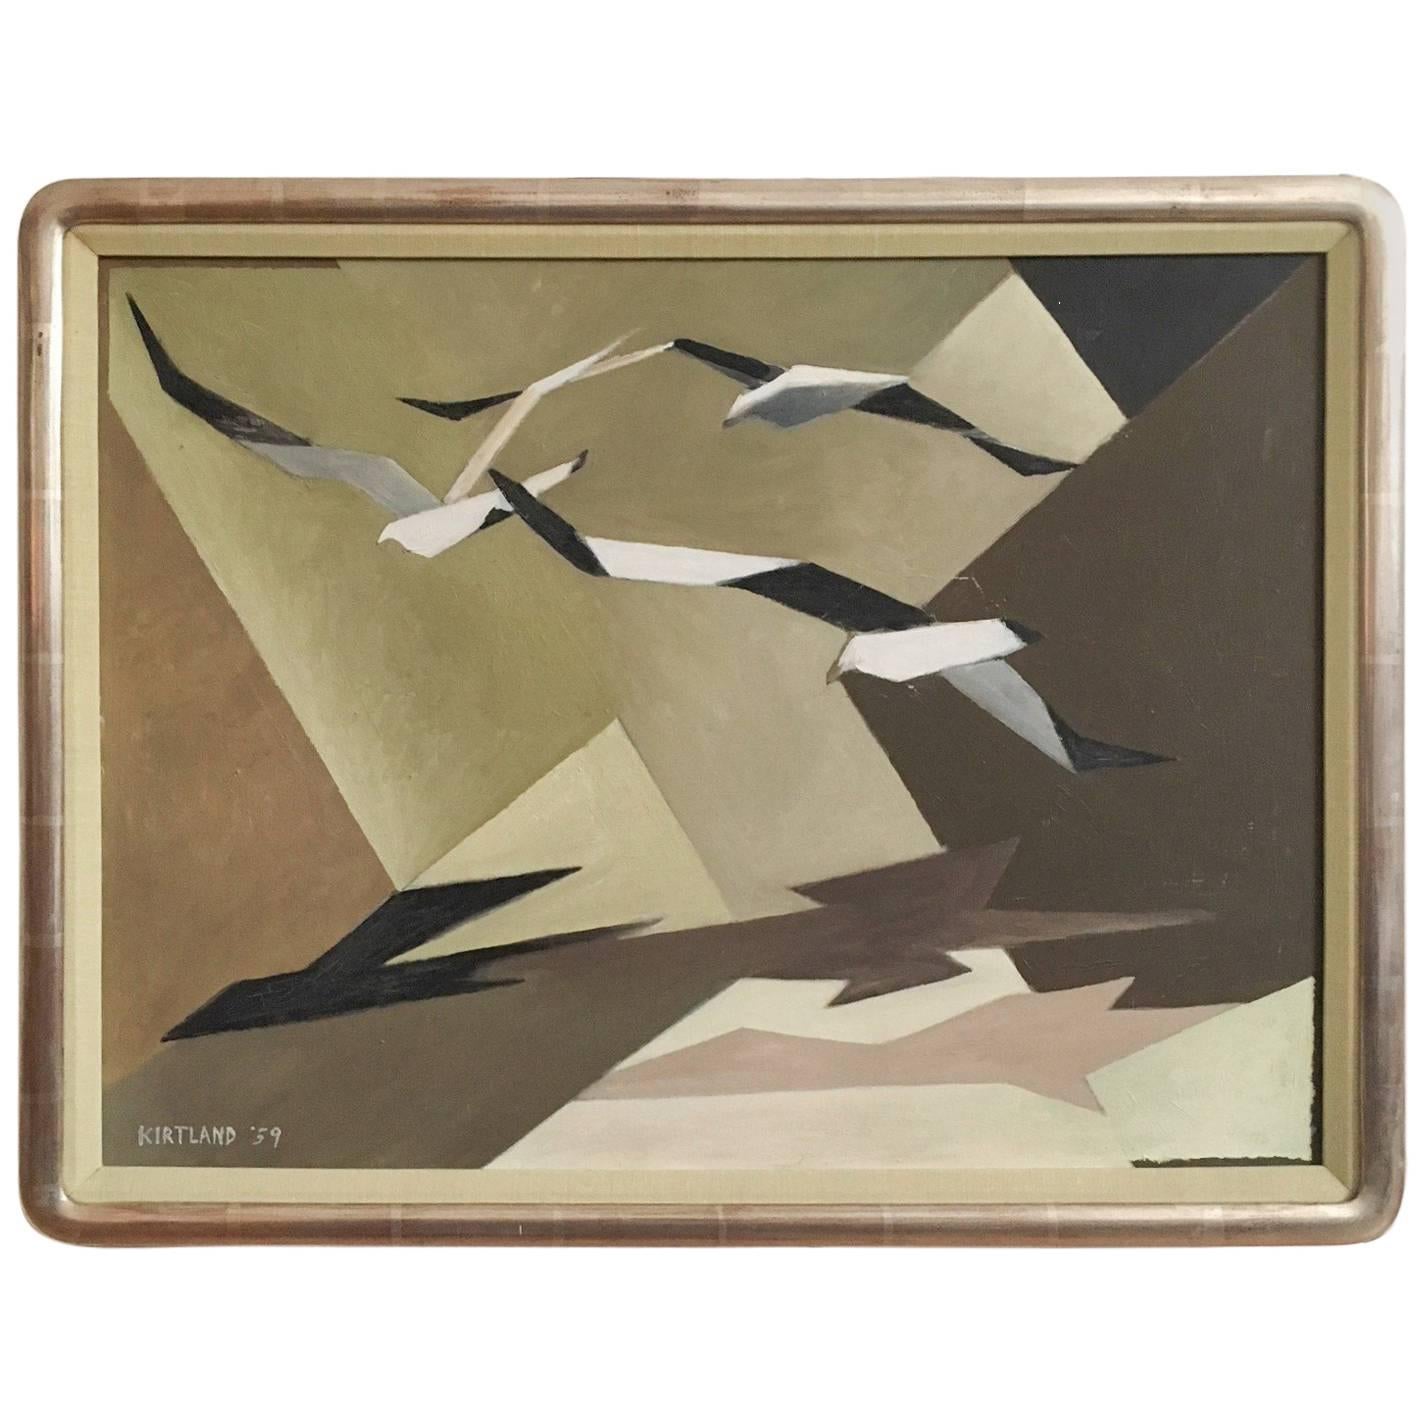 Modernist Composition of Three Abstract Seagulls, 1959